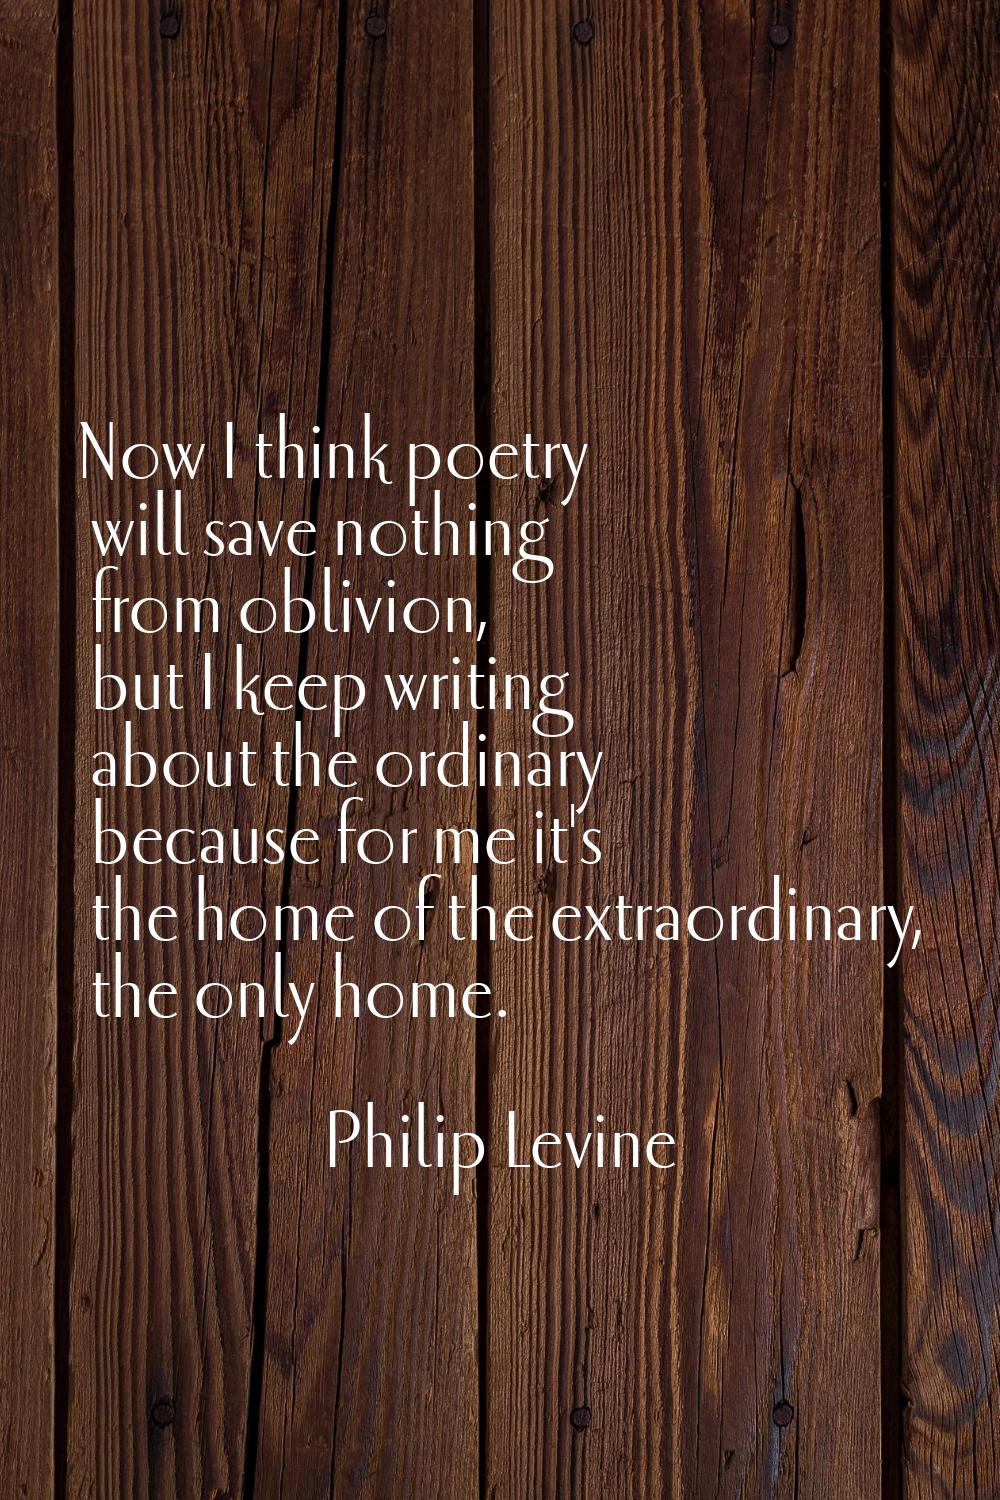 Now I think poetry will save nothing from oblivion, but I keep writing about the ordinary because f